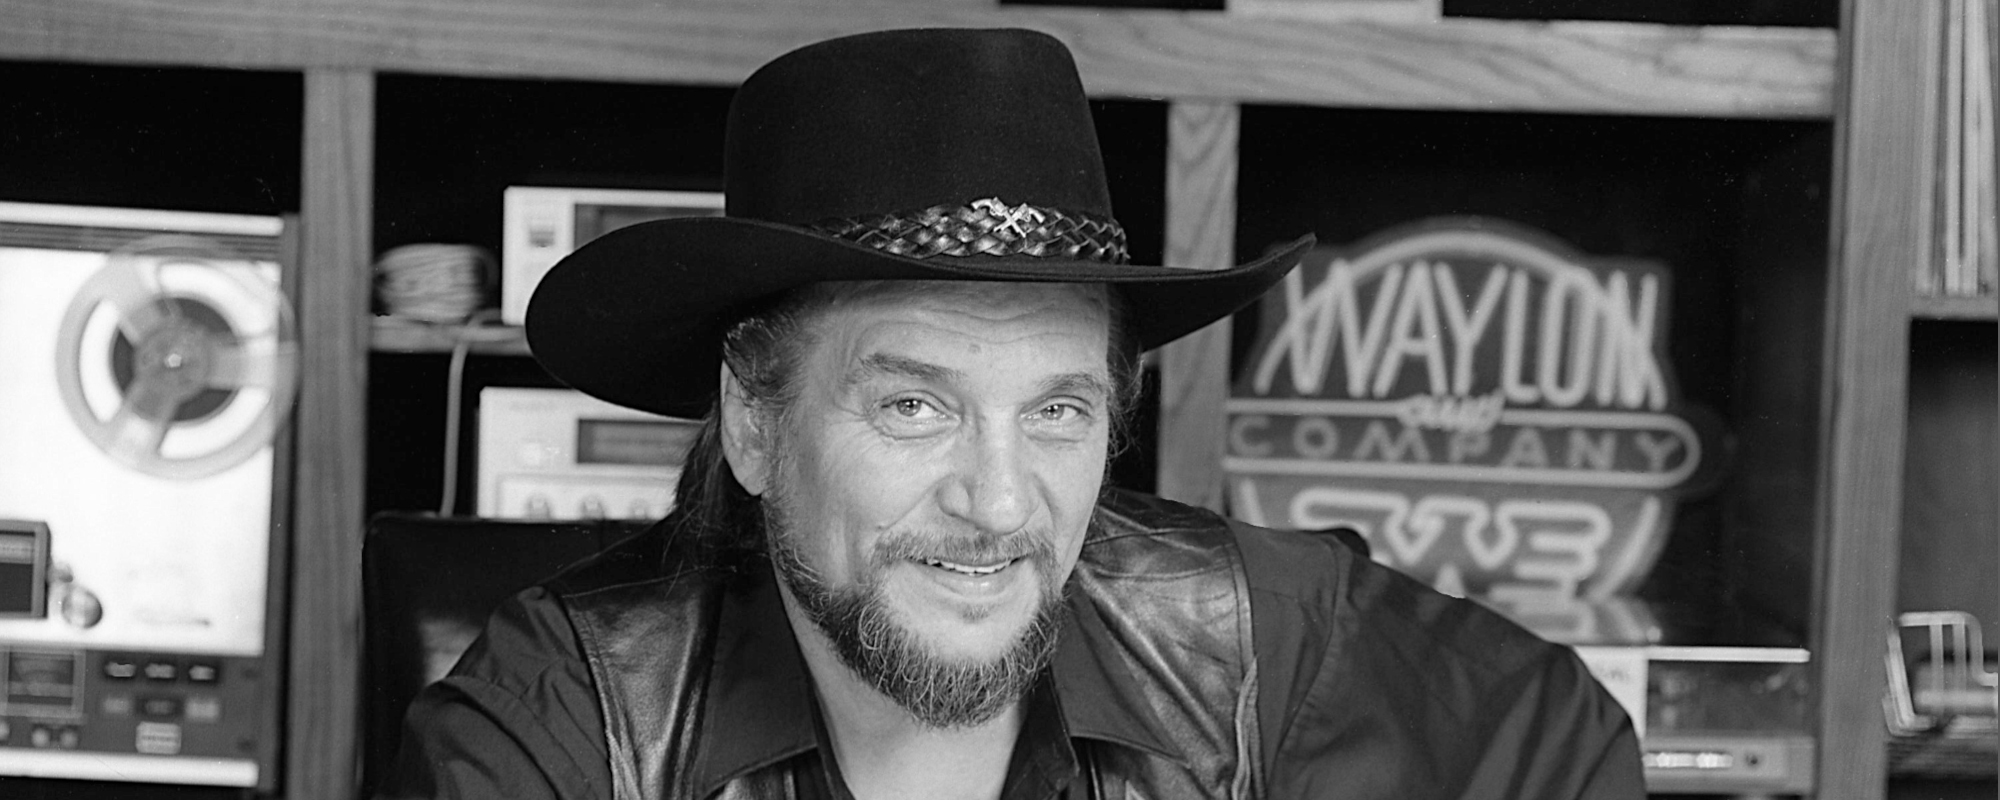 Meaning Behind Waylon Jennings’ Self-Aware No. 1 “I’ve Always Been Crazy”